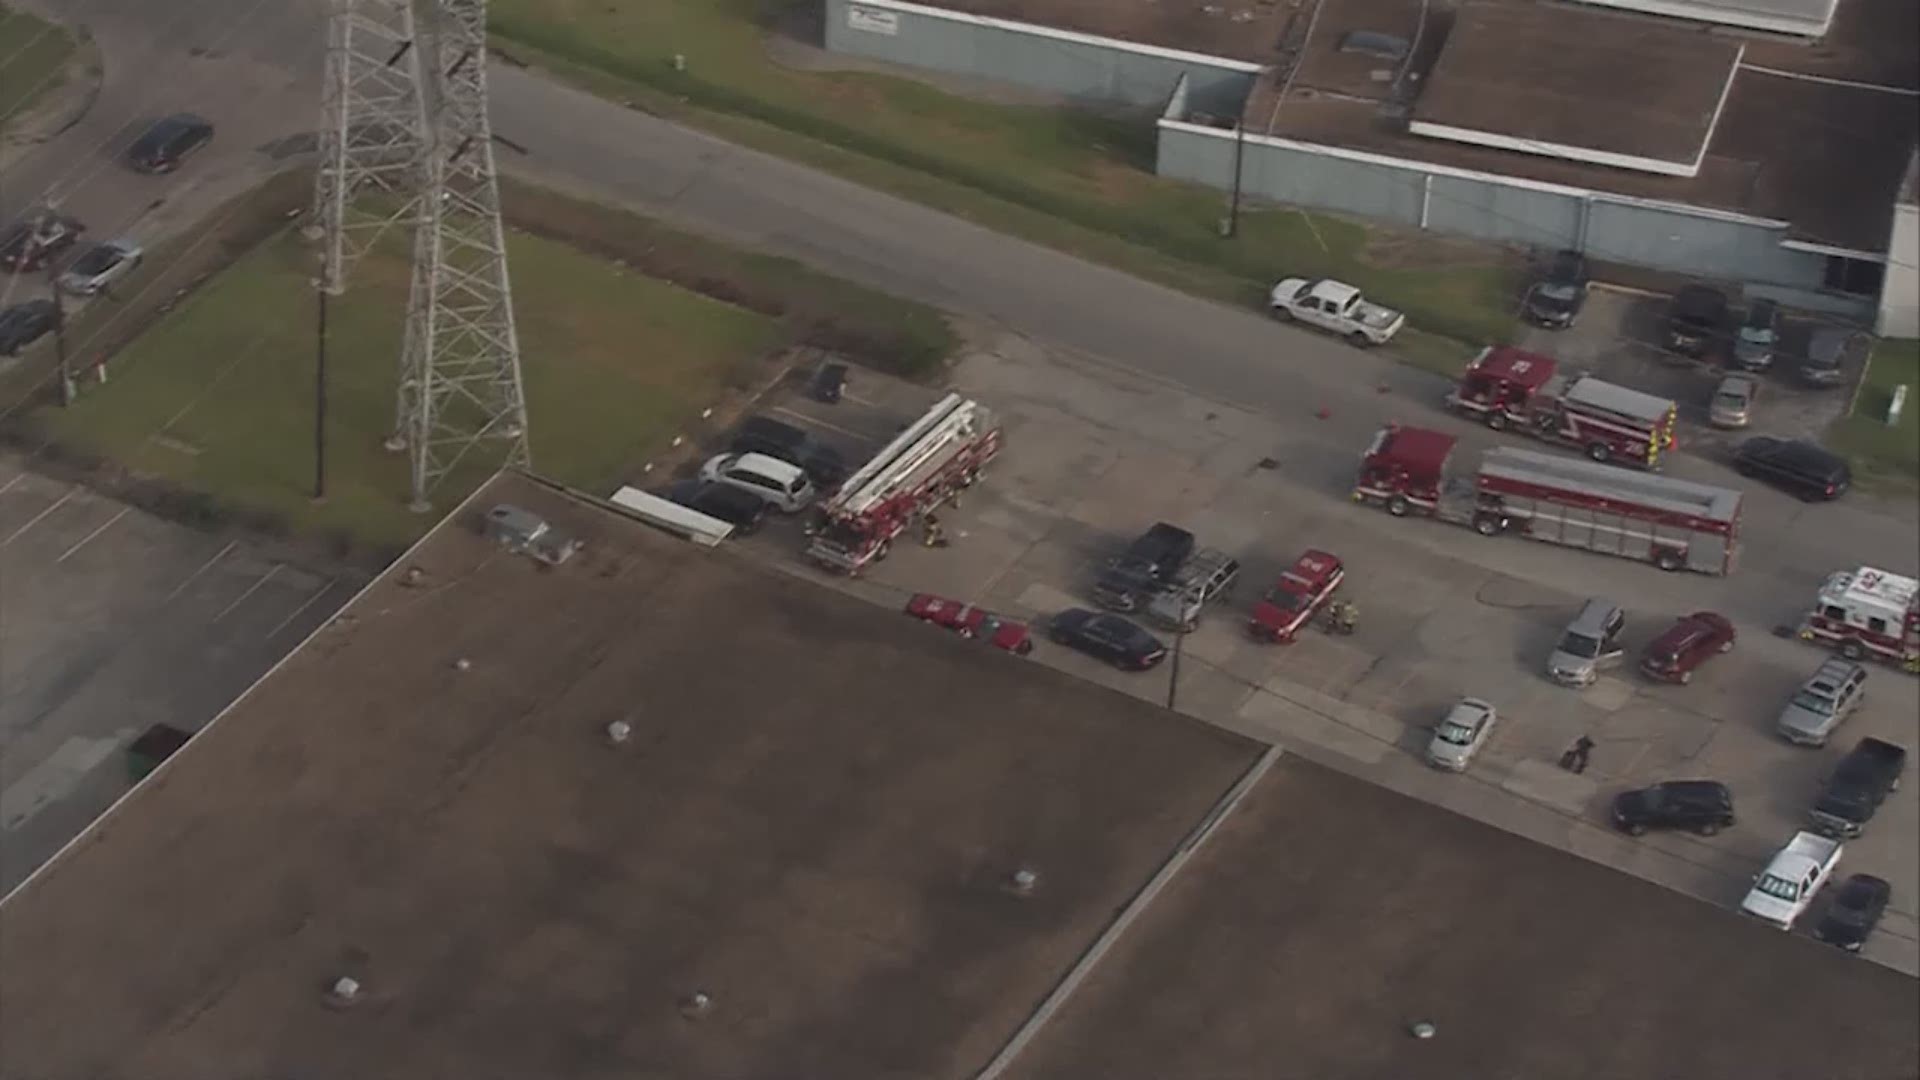 Firefighters rescued a person who was trapped in a baling machine in southeast Houston Wednesday morning.